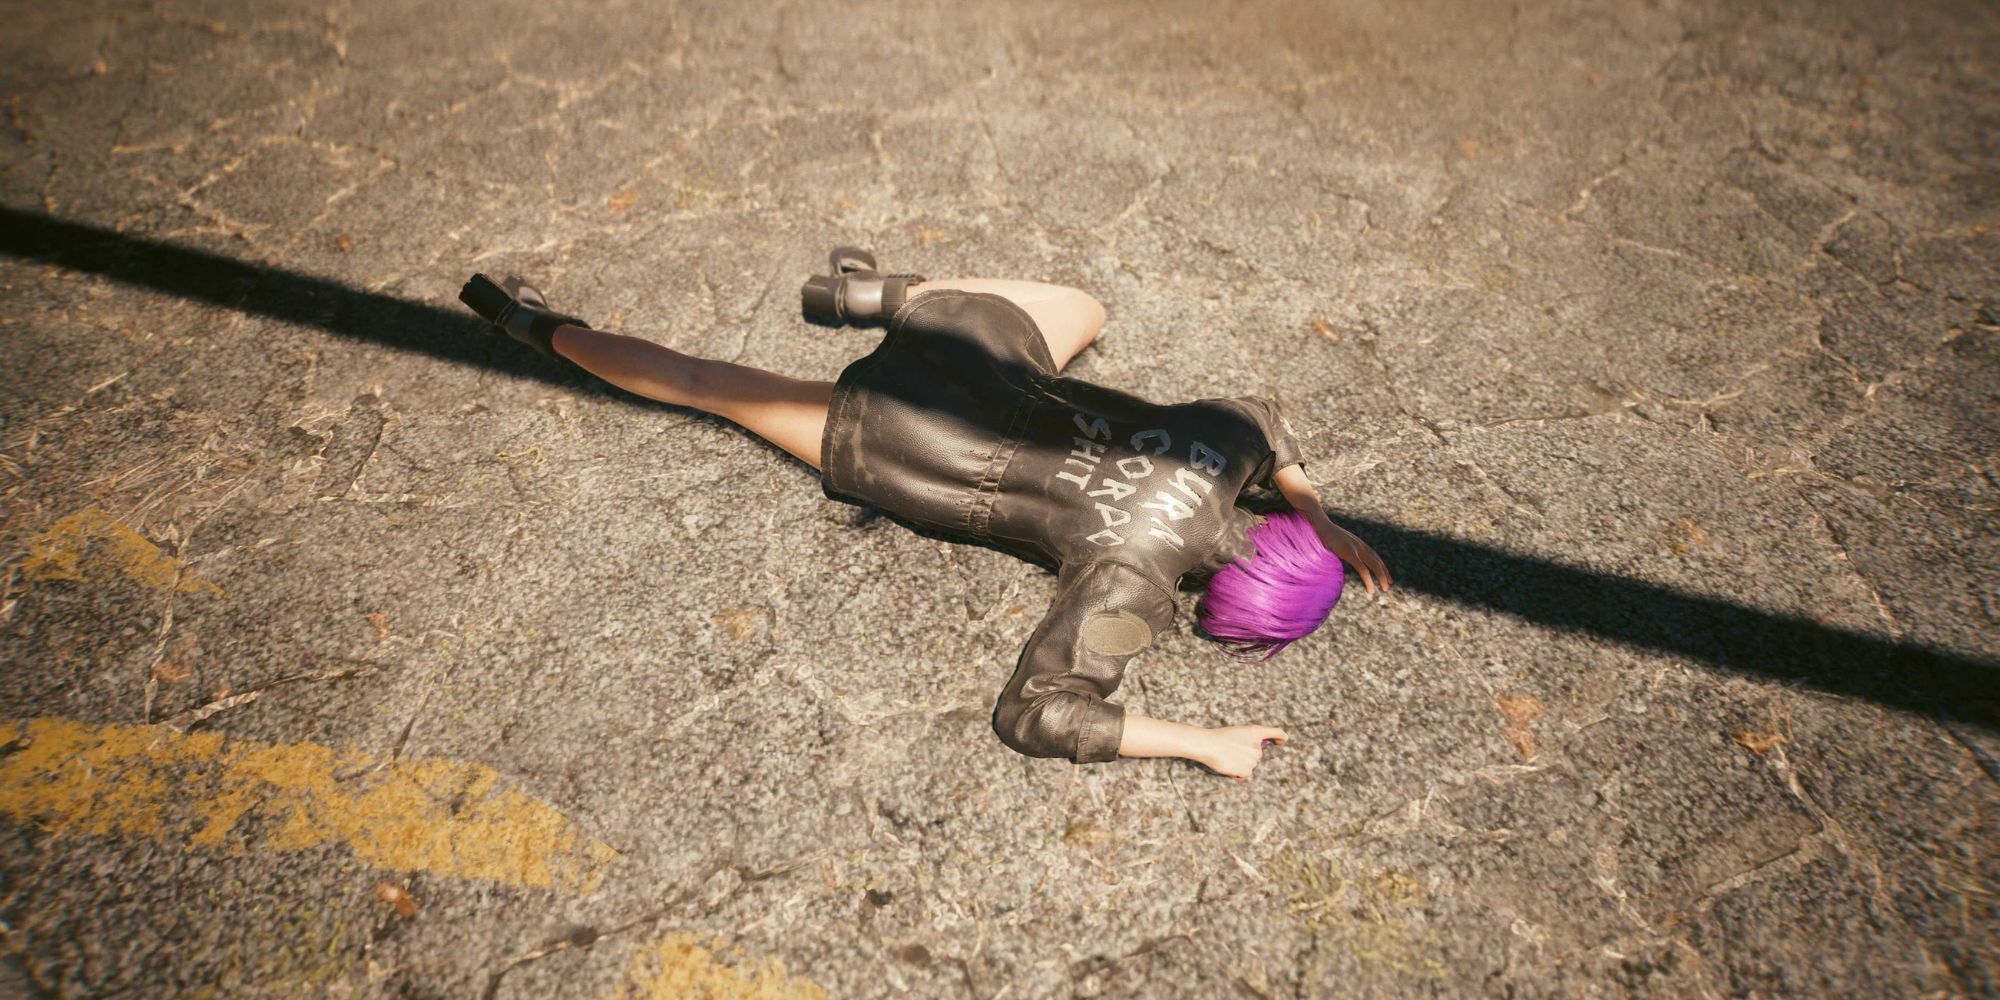 The player character in Cyberpunk 2077 after falling over, face first on the pavement. 